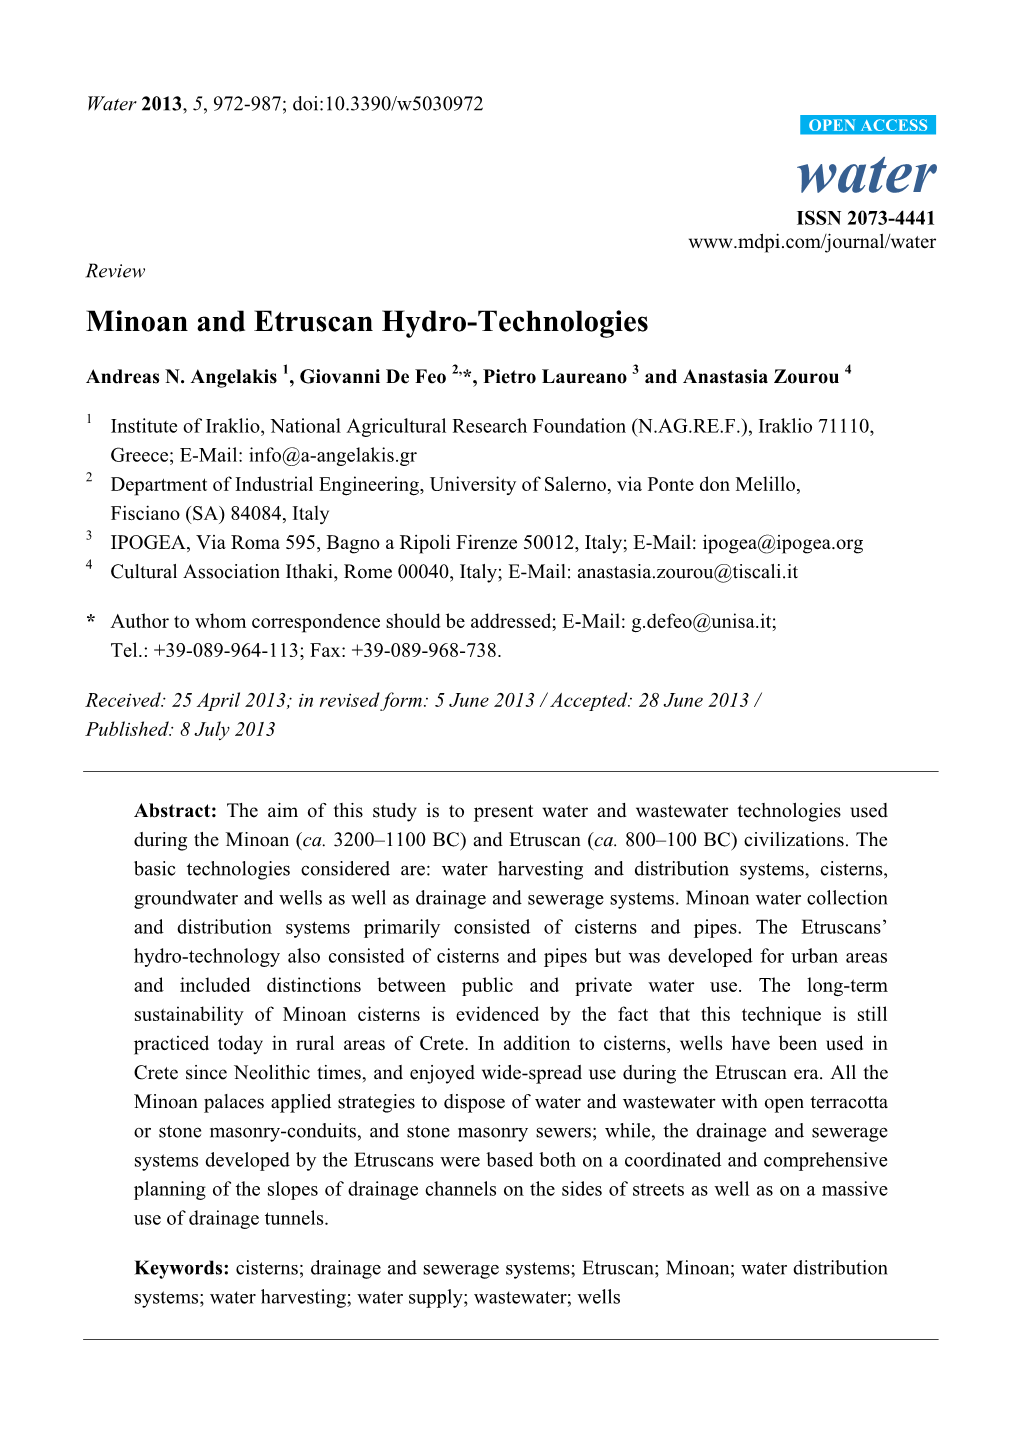 Minoan and Etruscan Hydro-Technologies